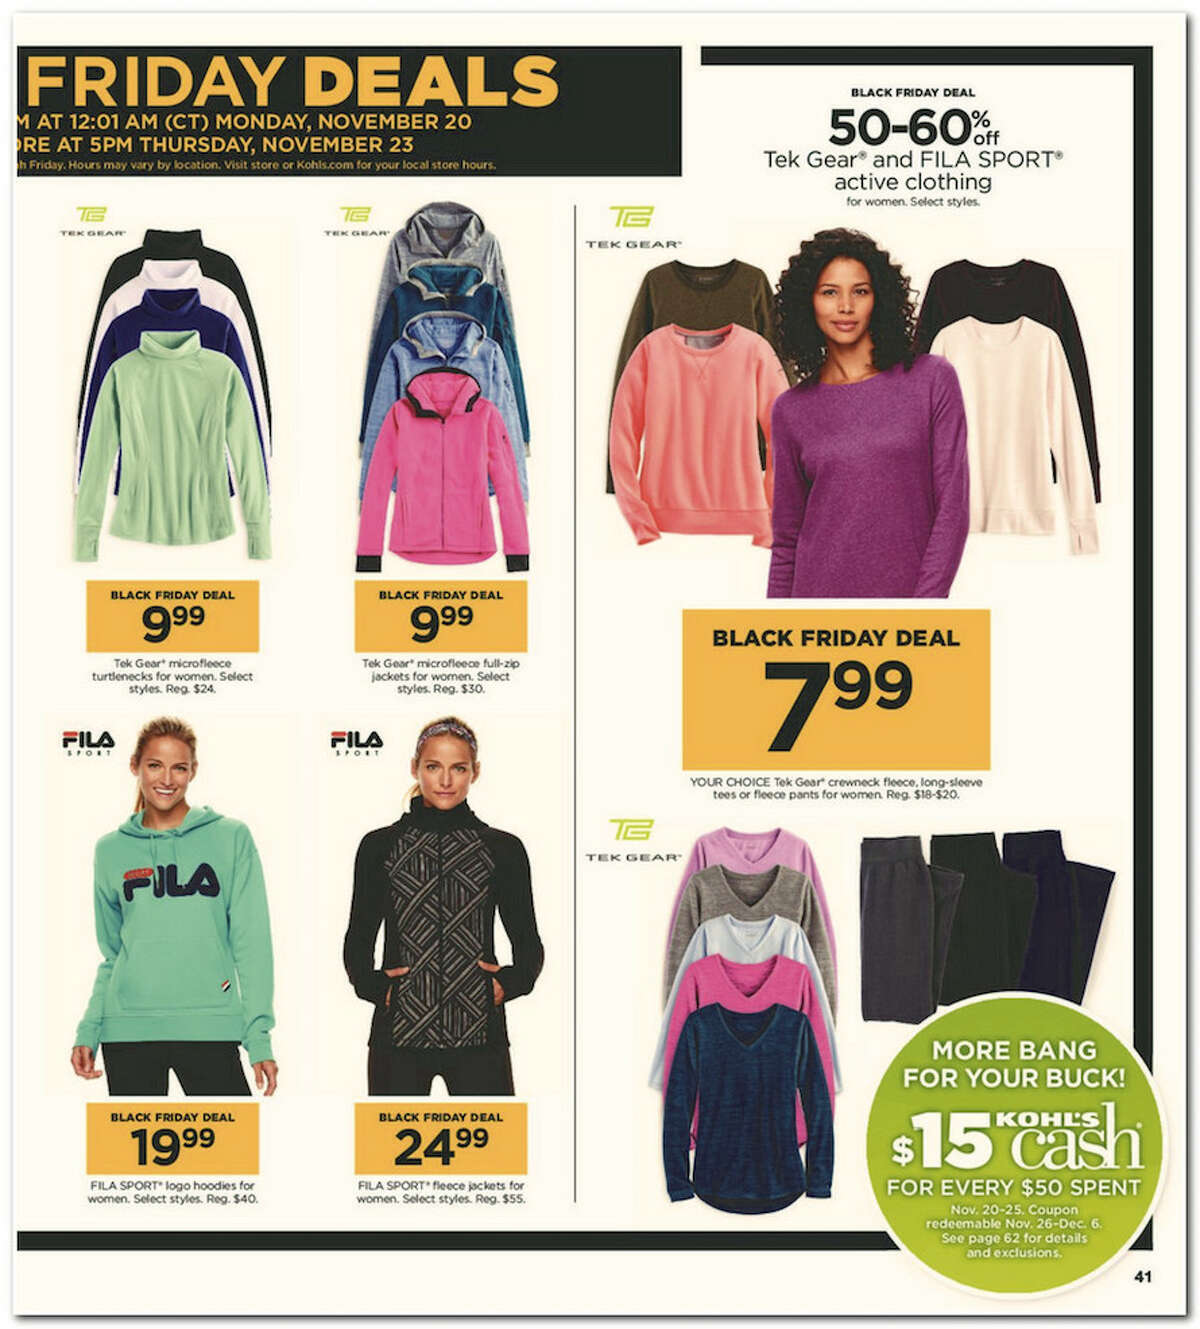 Kohl's Black Friday 2017 Doorbuster ad circular released (see all 64 pages)